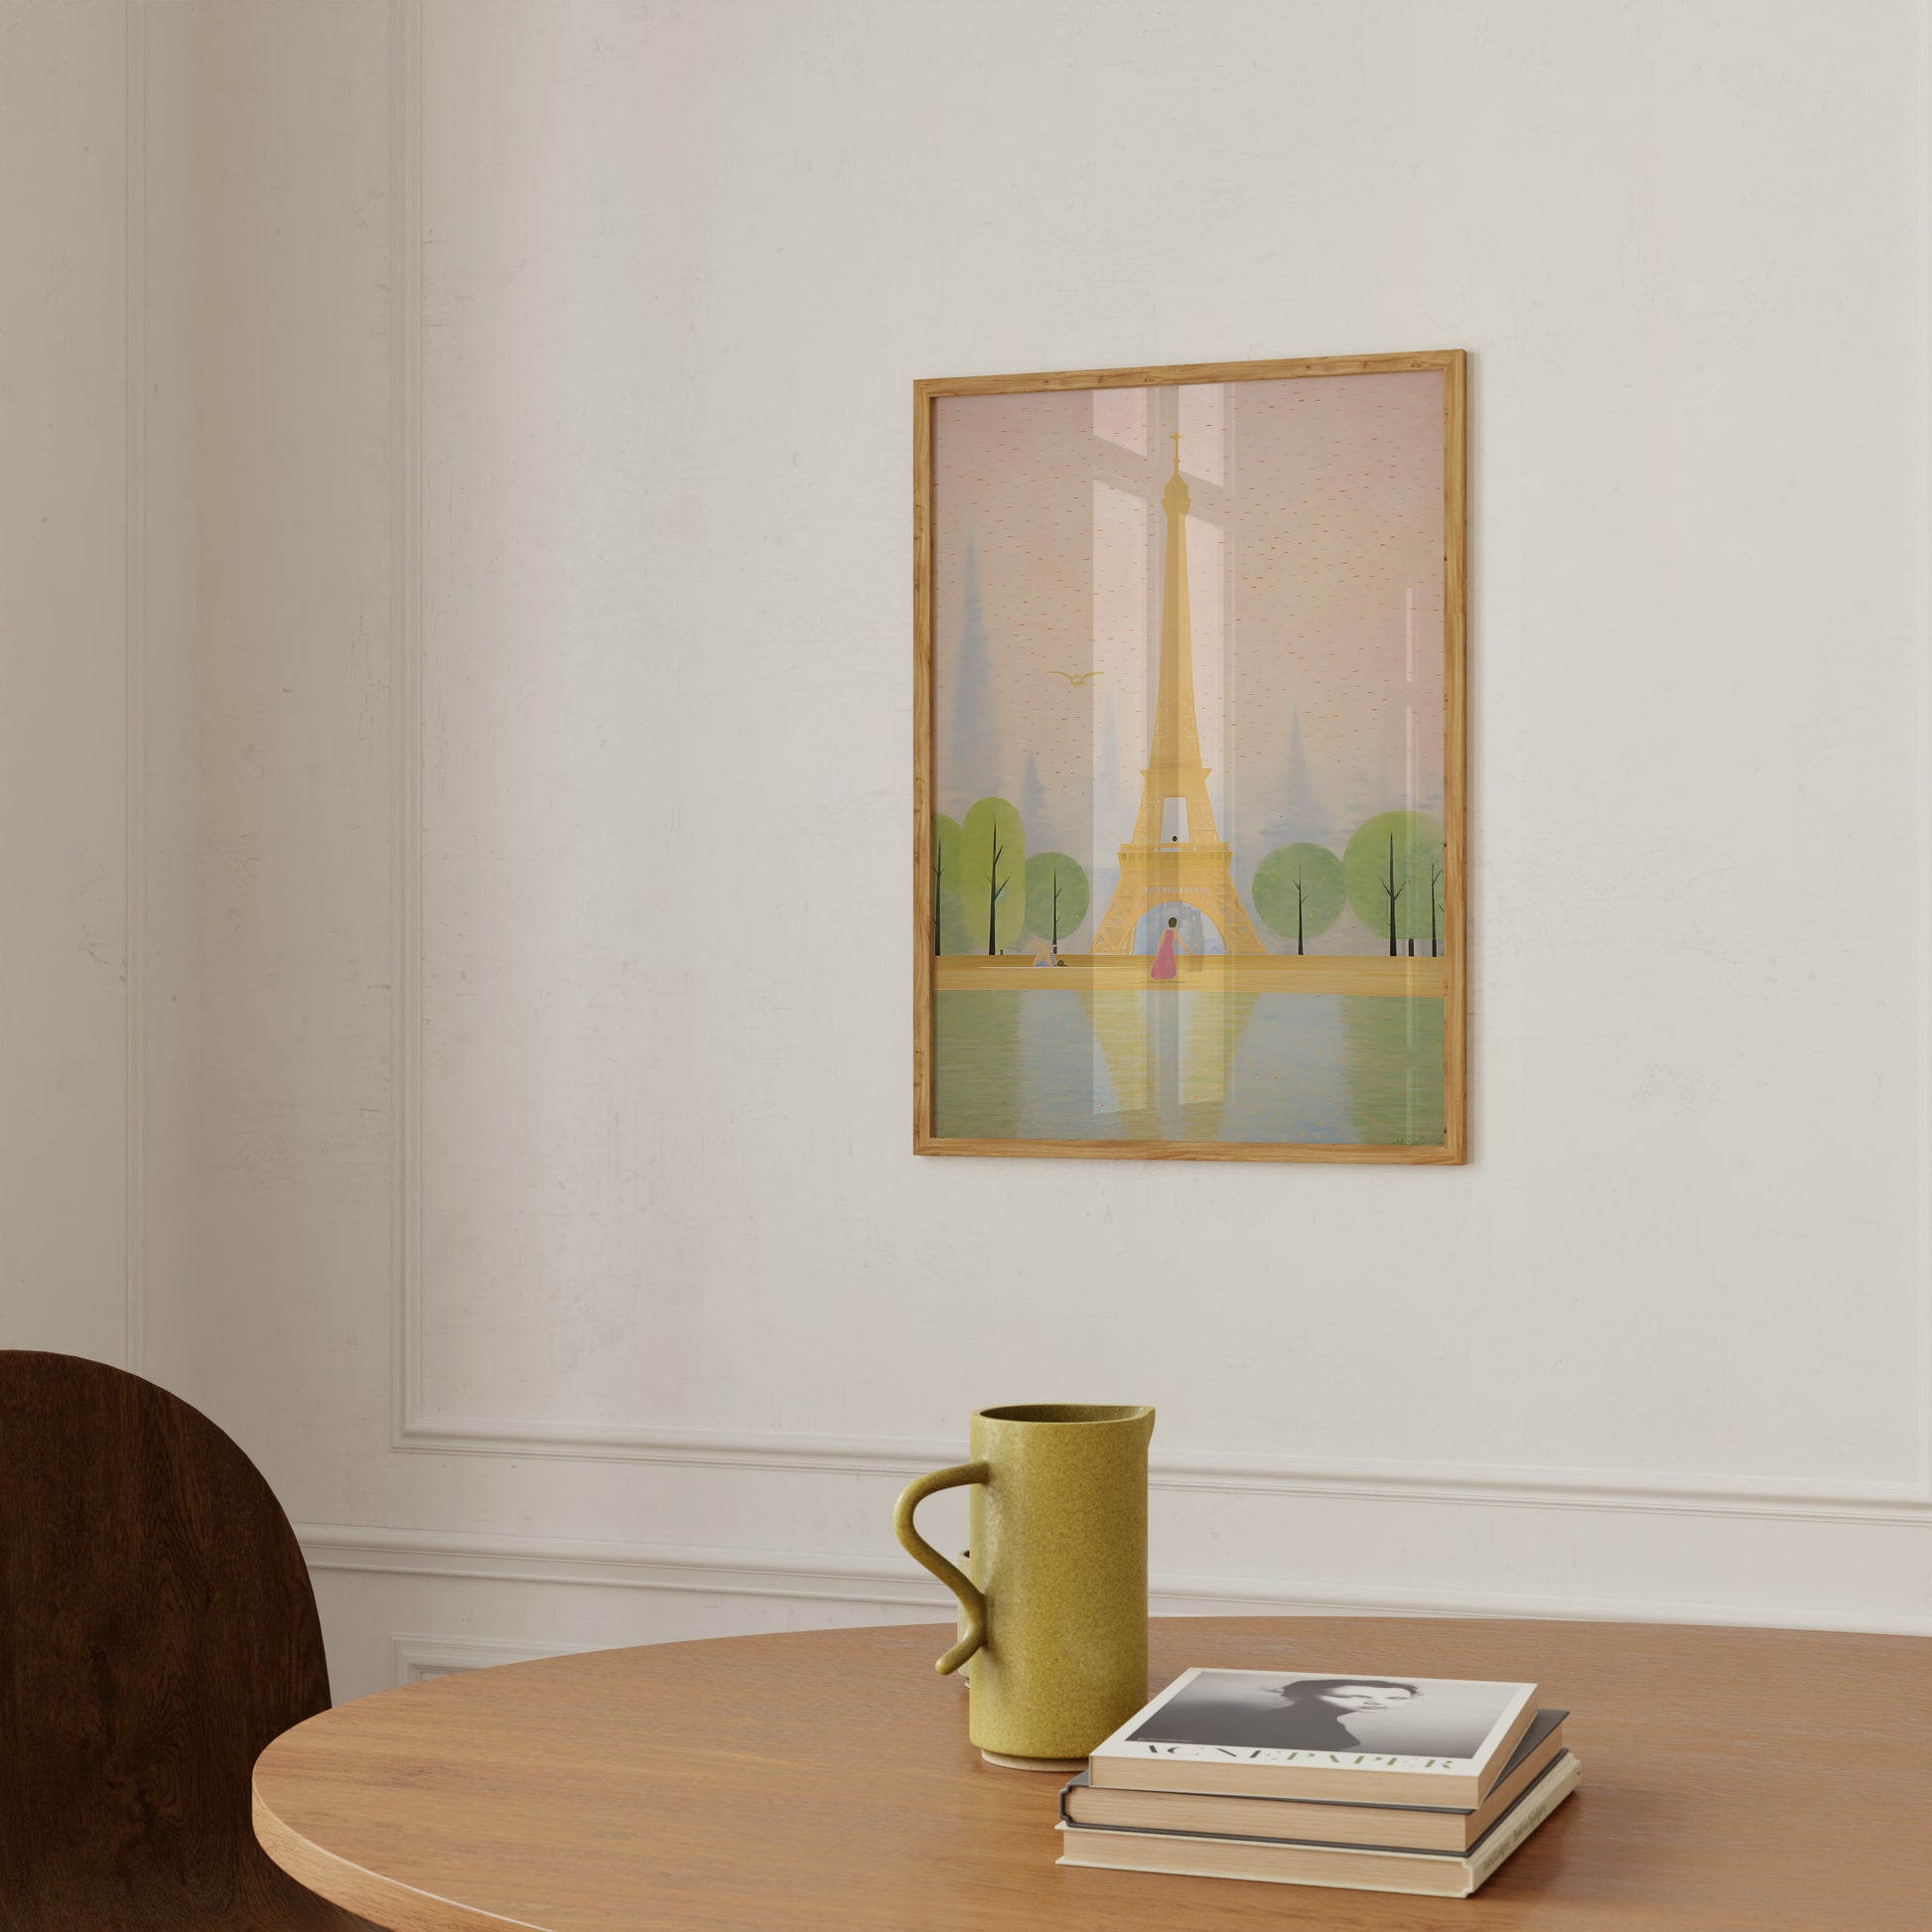 A framed illustration of the Eiffel Tower hangs on a wall above a table with a mug and books.